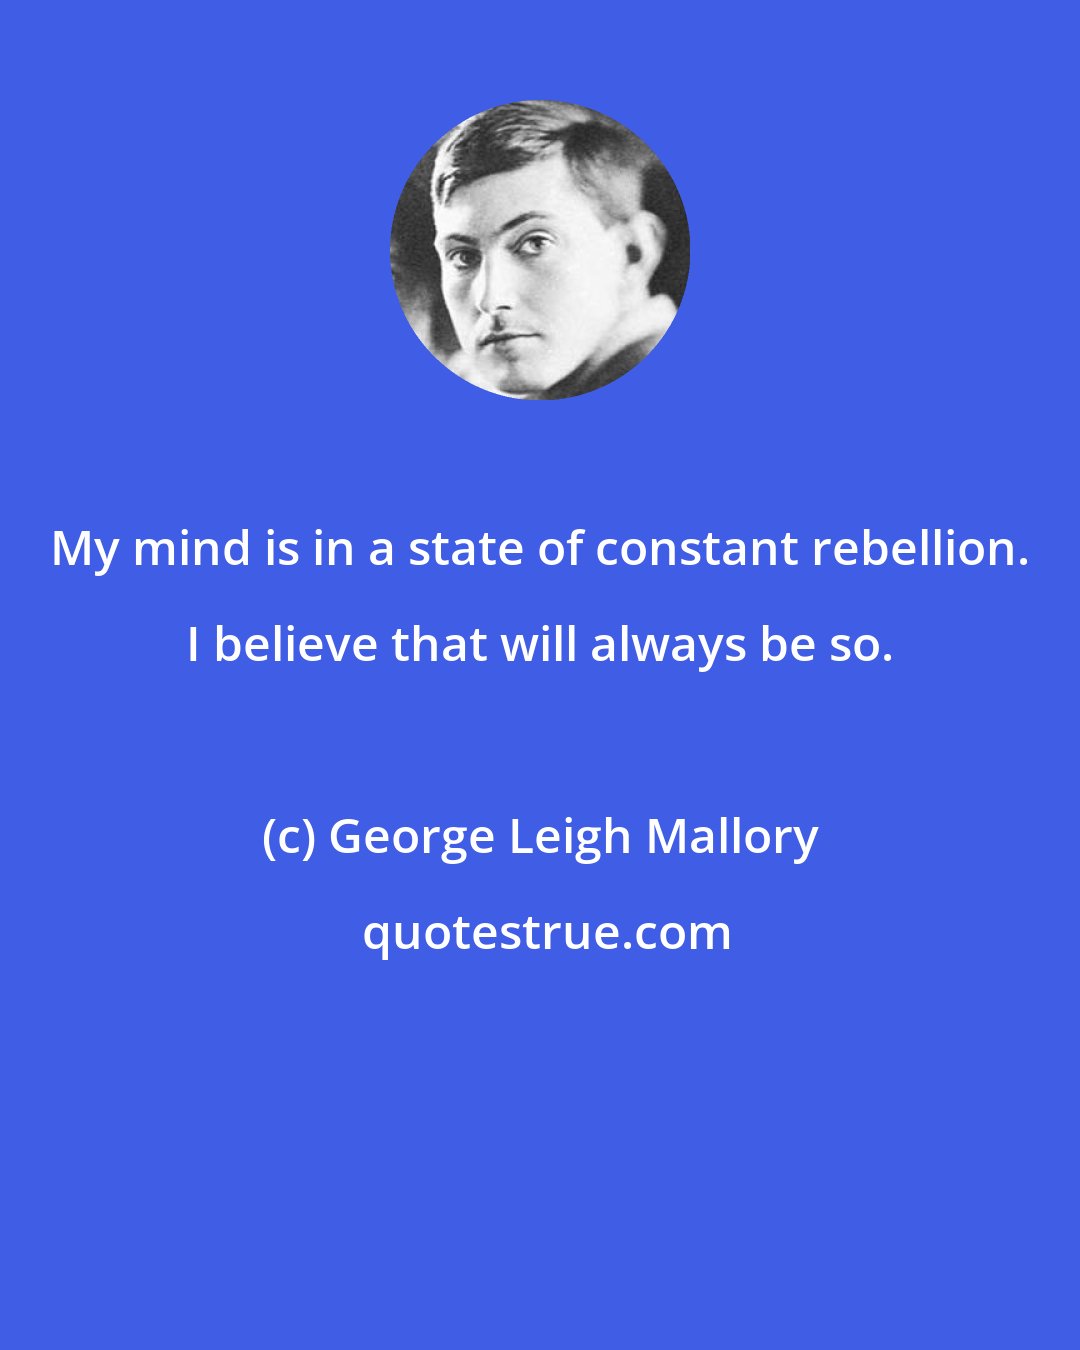 George Leigh Mallory: My mind is in a state of constant rebellion. I believe that will always be so.